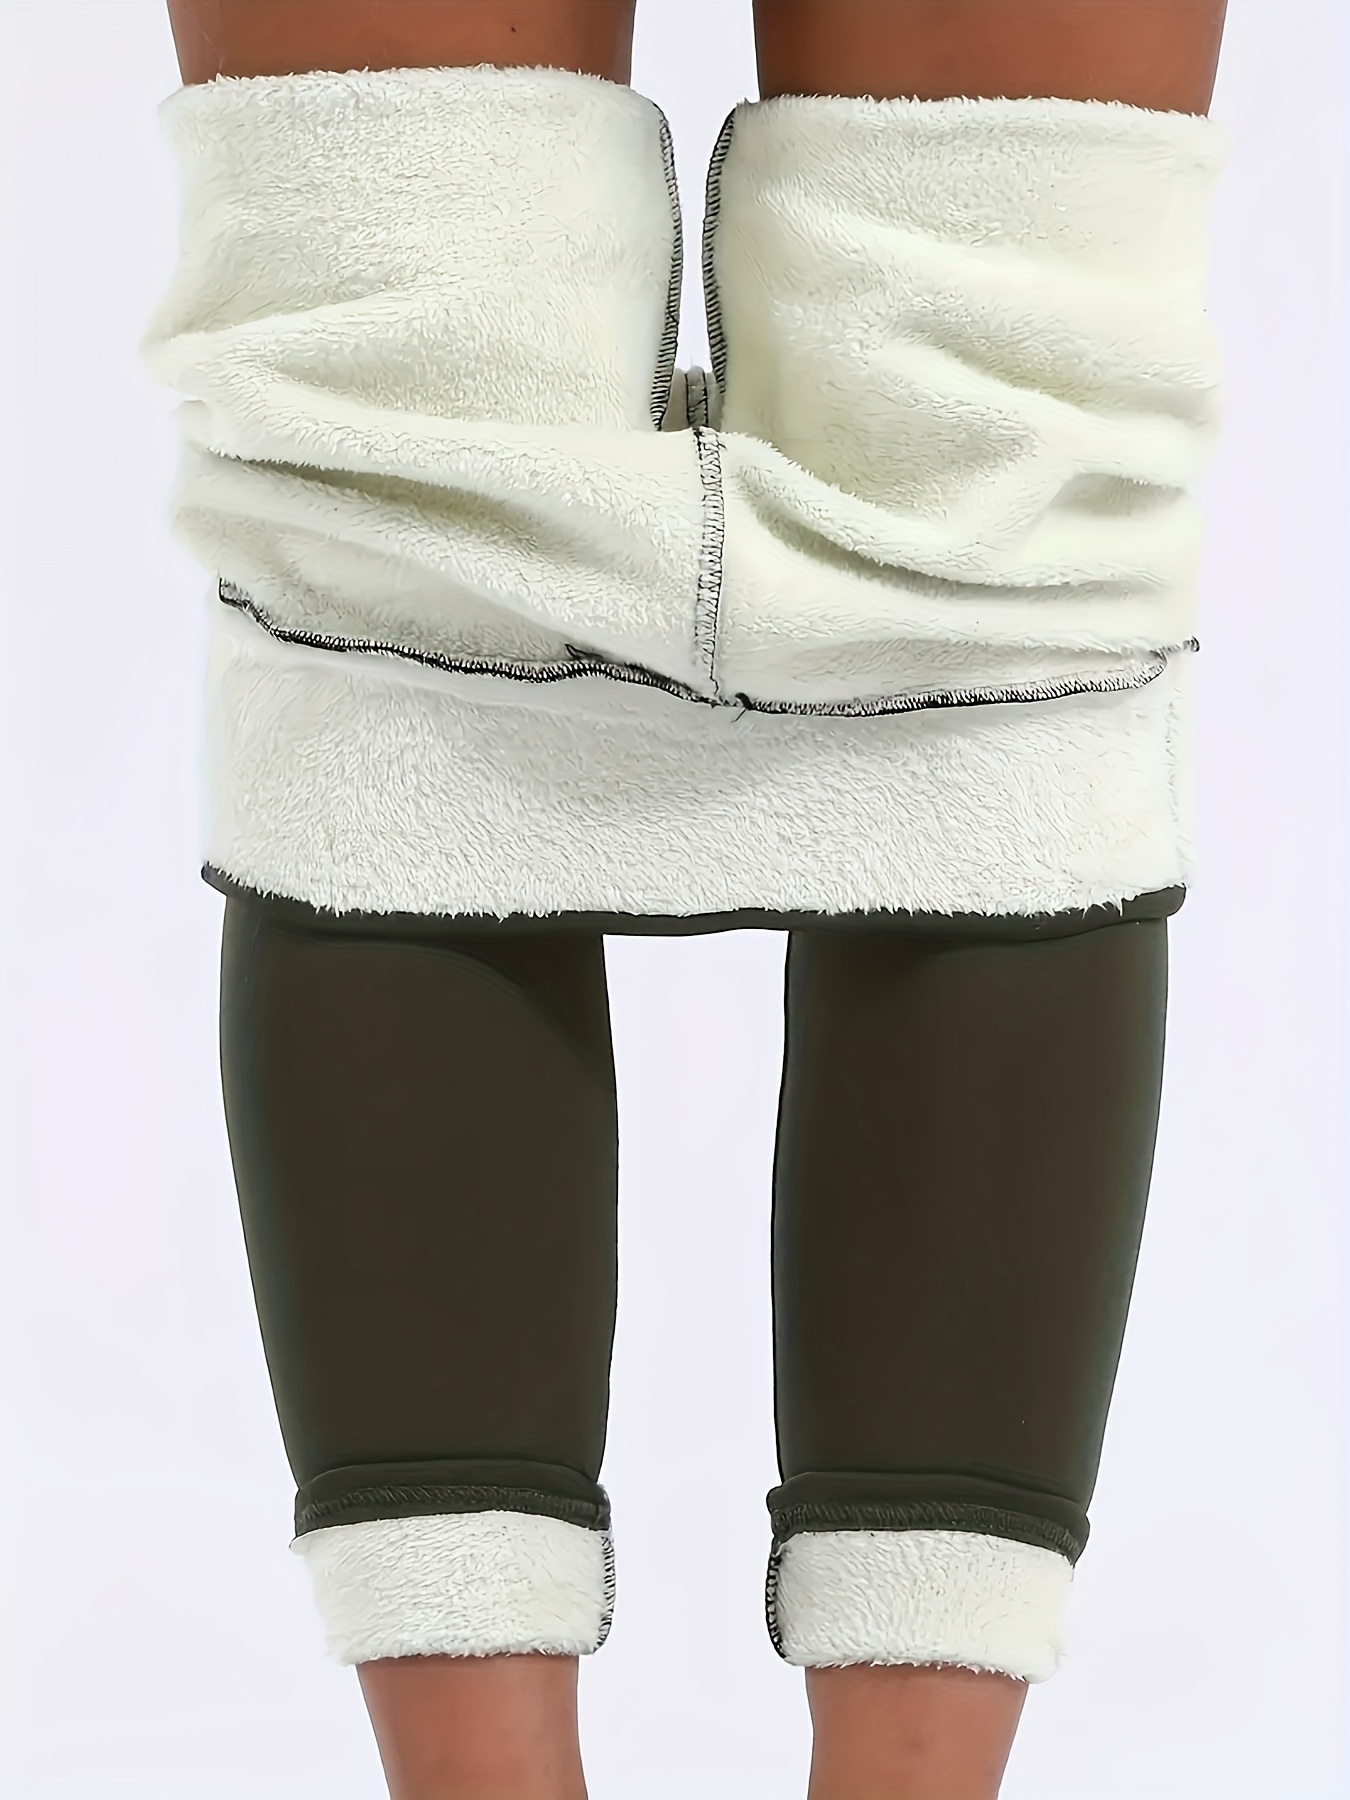 Purchase Thermal Leggings, beige 840139 - 840145 at 1399 руб — Faberlic  Online Store.